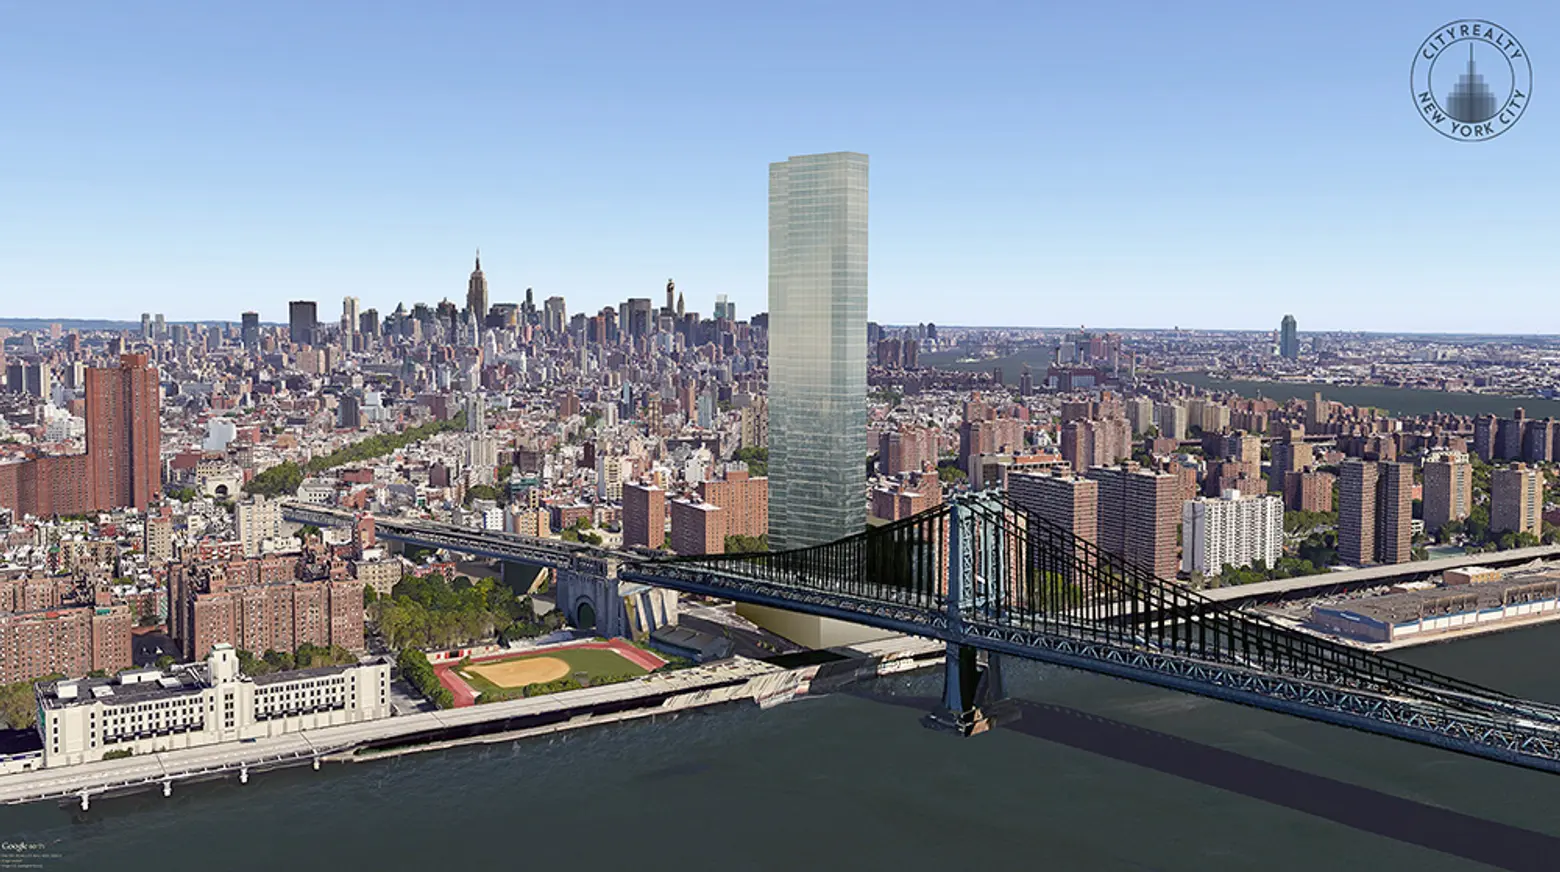 Construction Update: Extell’s Controversial 800-Foot Tower Ready to Rise at 250 South Street